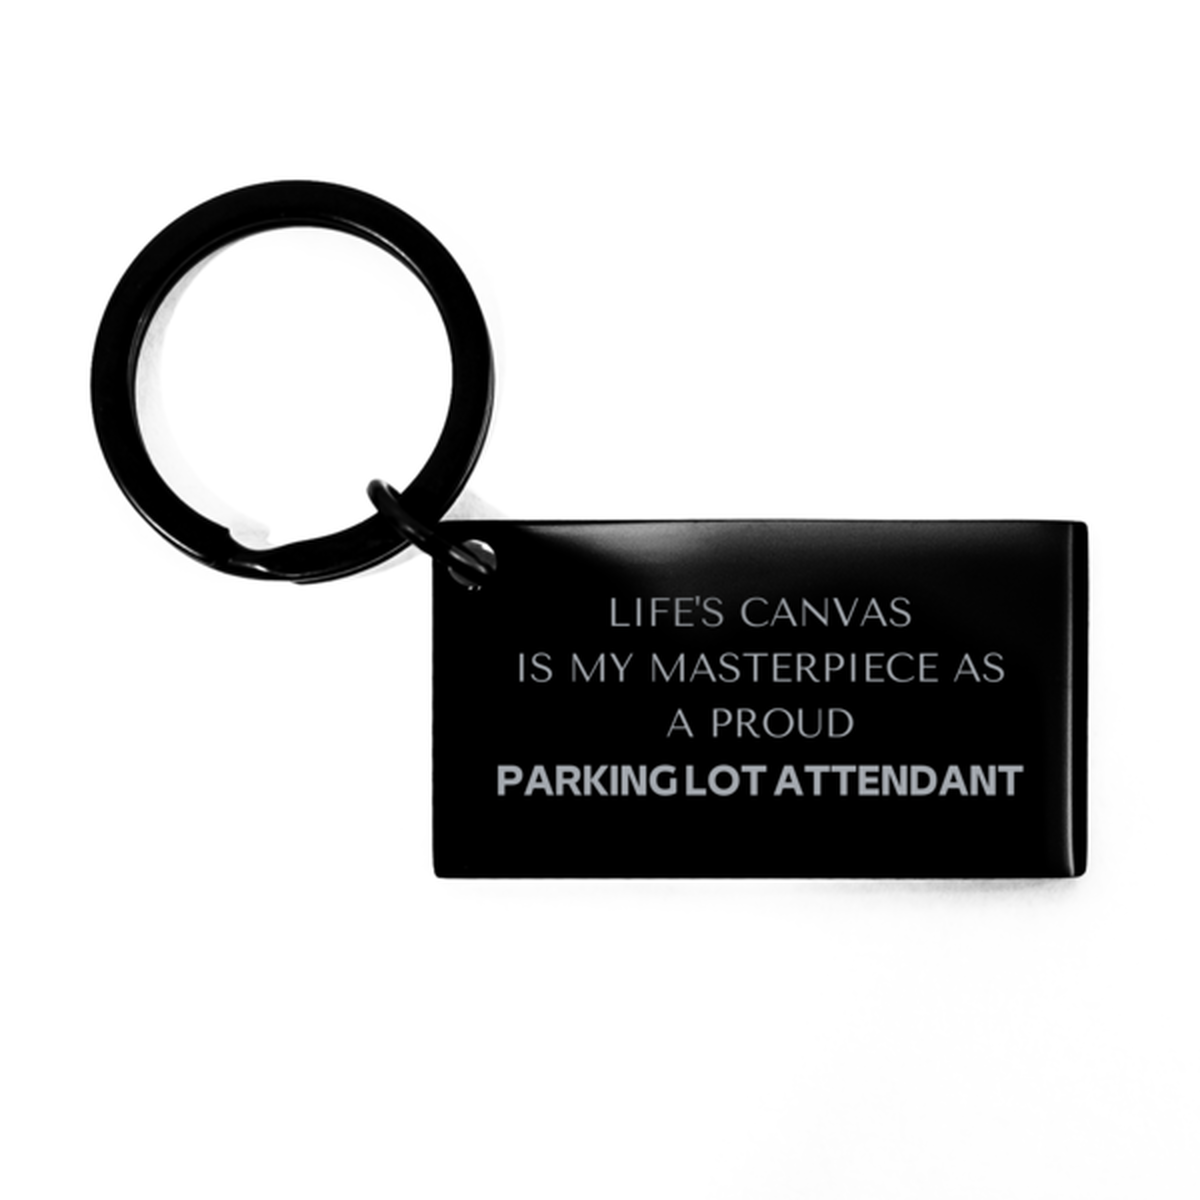 Proud Parking Lot Attendant Gifts, Life's canvas is my masterpiece, Epic Birthday Christmas Unique Keychain For Parking Lot Attendant, Coworkers, Men, Women, Friends